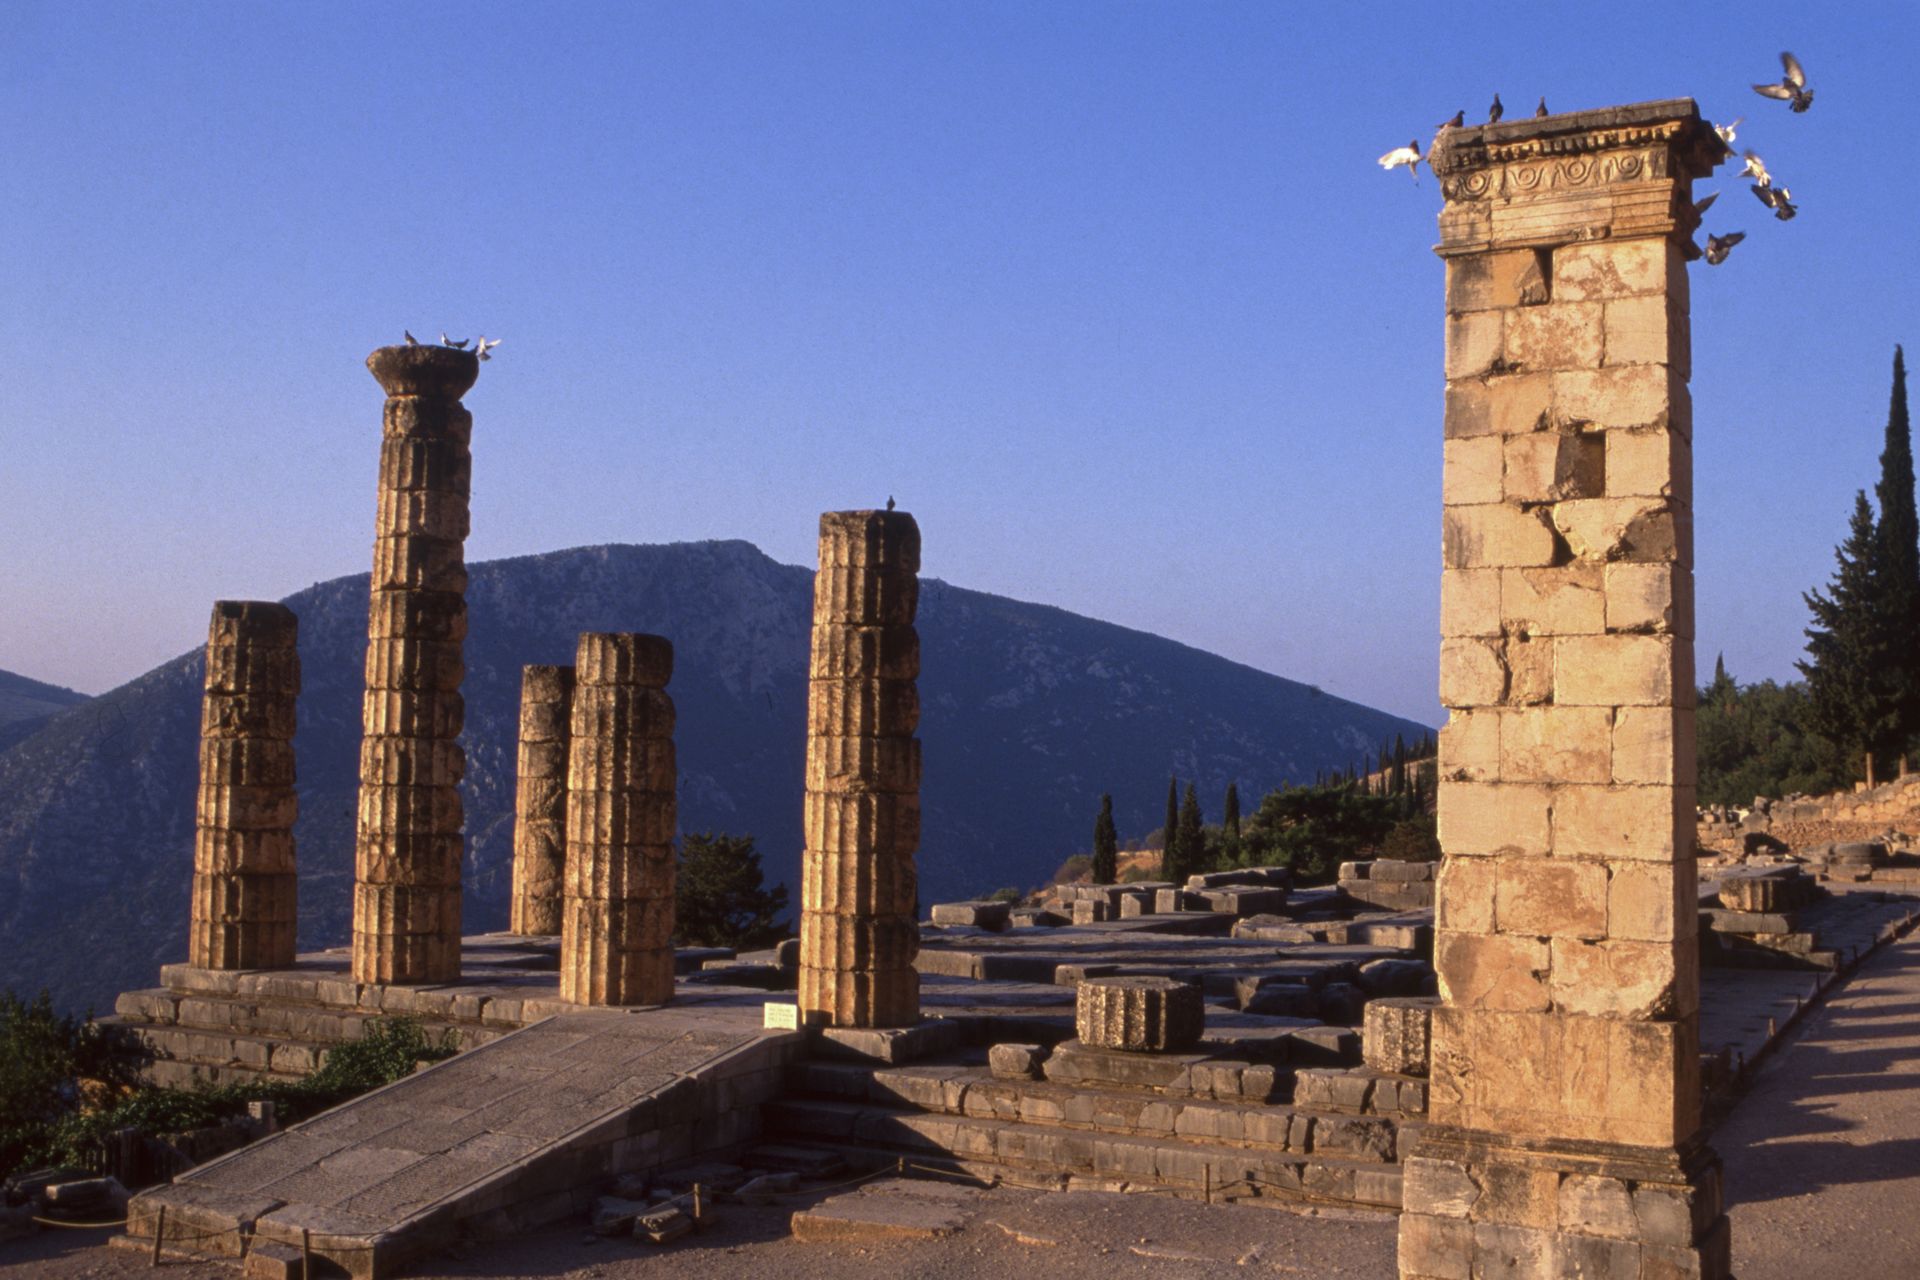 <p>Delphi is known for its oracle, who allegedly predicted the future. Located under the slopes of Mount Parnassus, the archaeological site is one of the most striking in the country, with the Temple of Apollo where the Pythia delivered her oracles, the theater, and the stadium.</p>